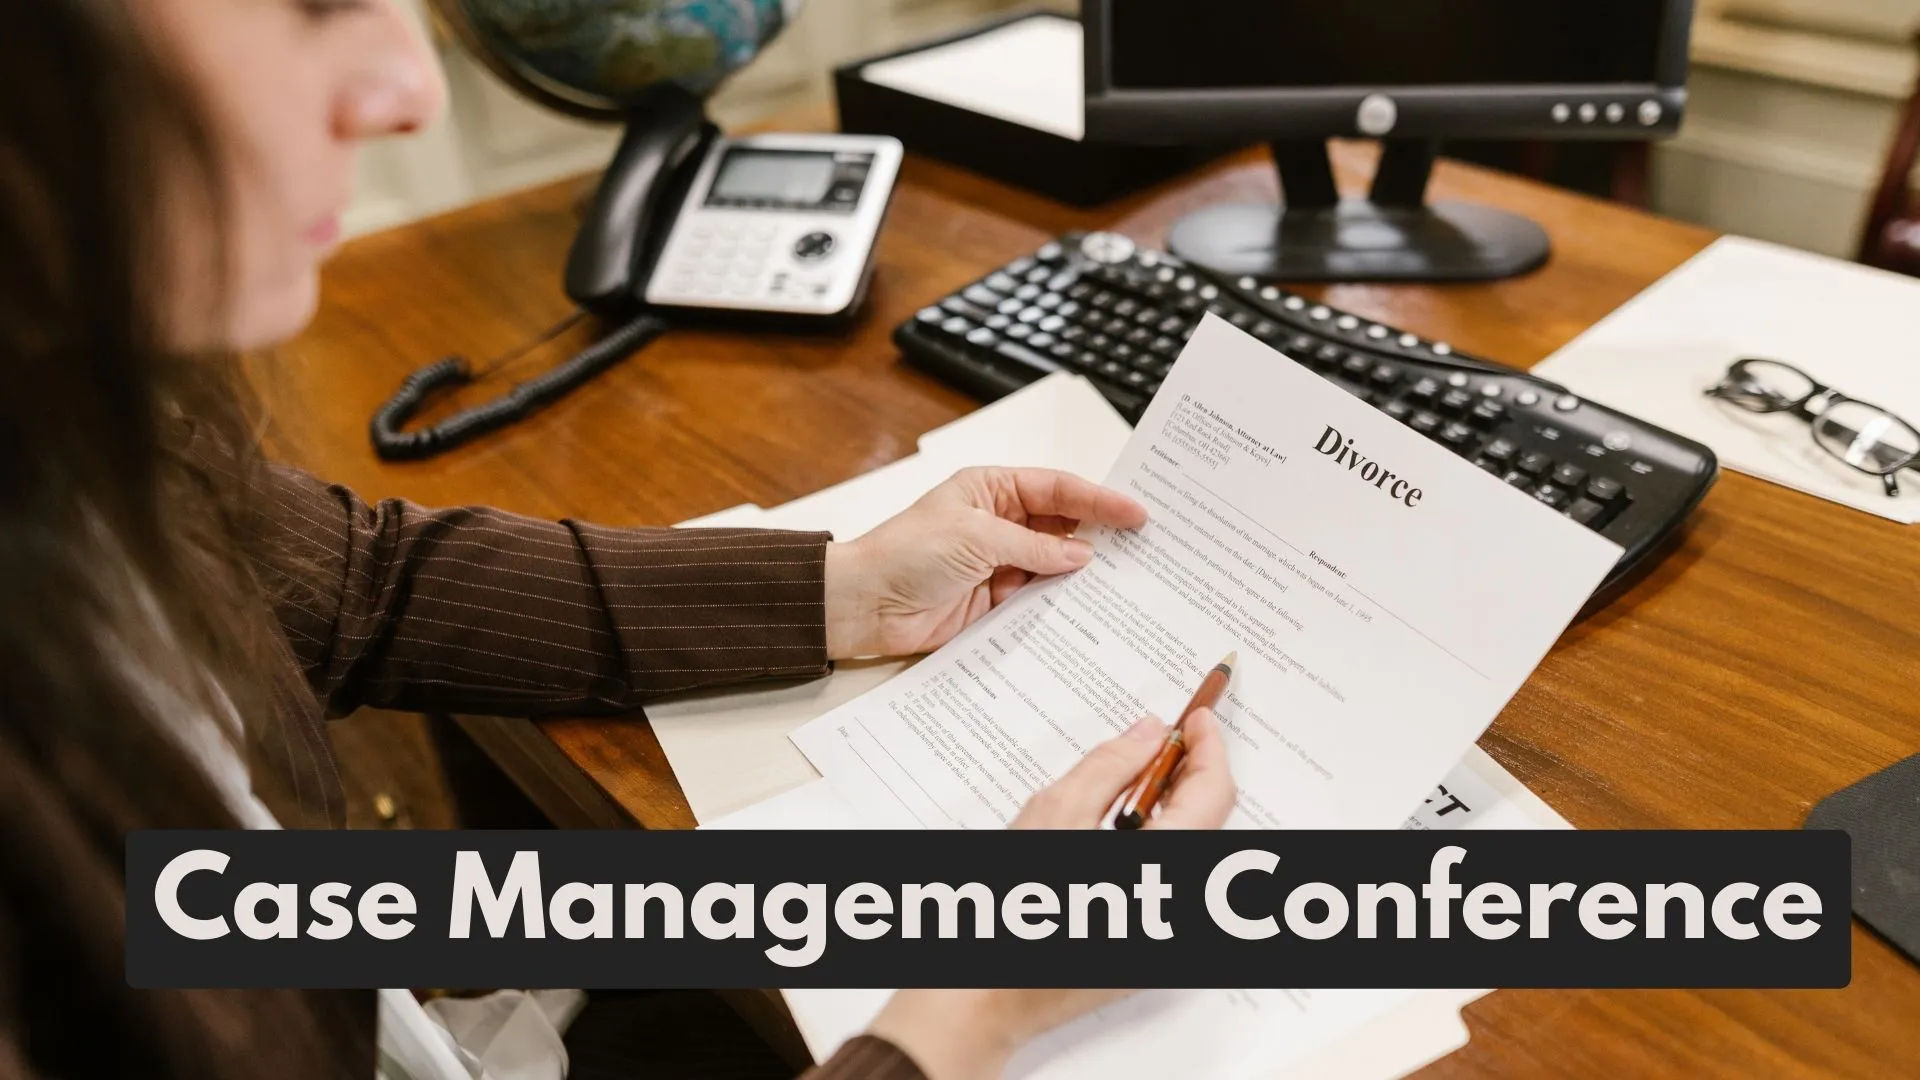 Case Management Conference – Objectives, Purpose, FAQs